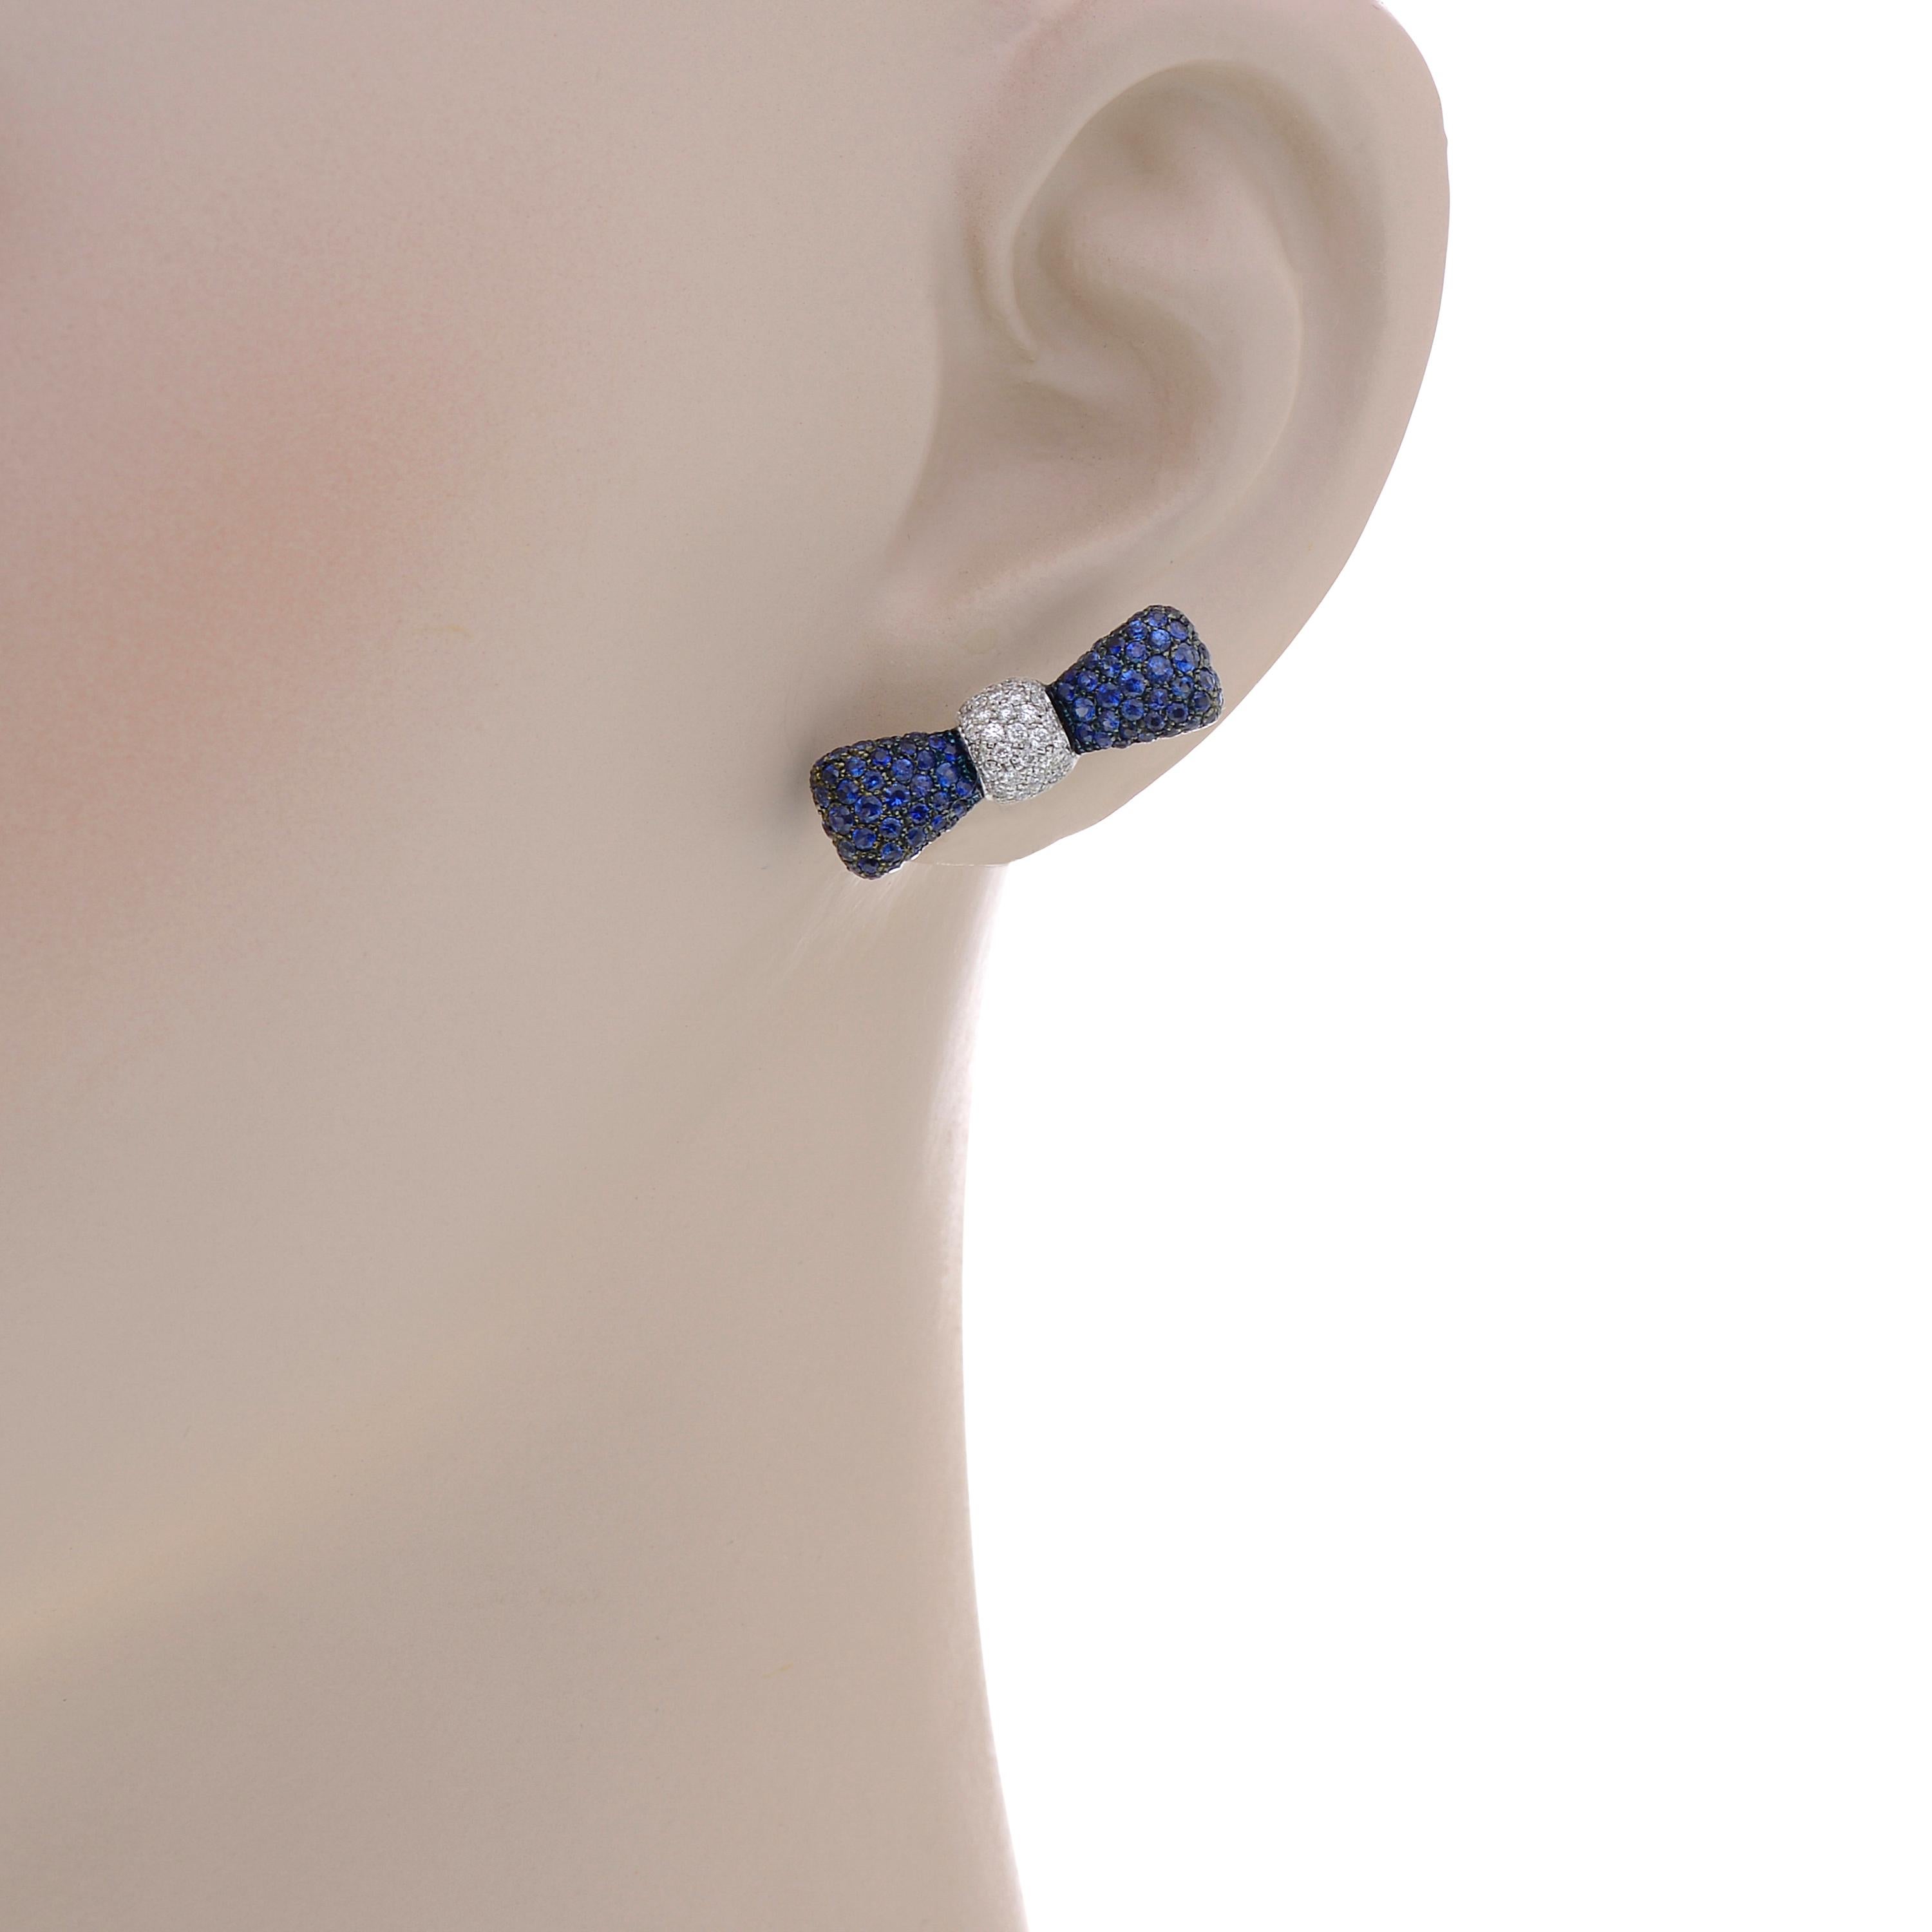 These beautiful Luca Carati 18K White Gold Stud Earrings feature a glittering bow crafted from 0.34ct. tw. diamonds and 1.85ct. tw. Sapphire. The Decoration Size is 23.5mm x 6.5mm. The Weight is 9.2g.
